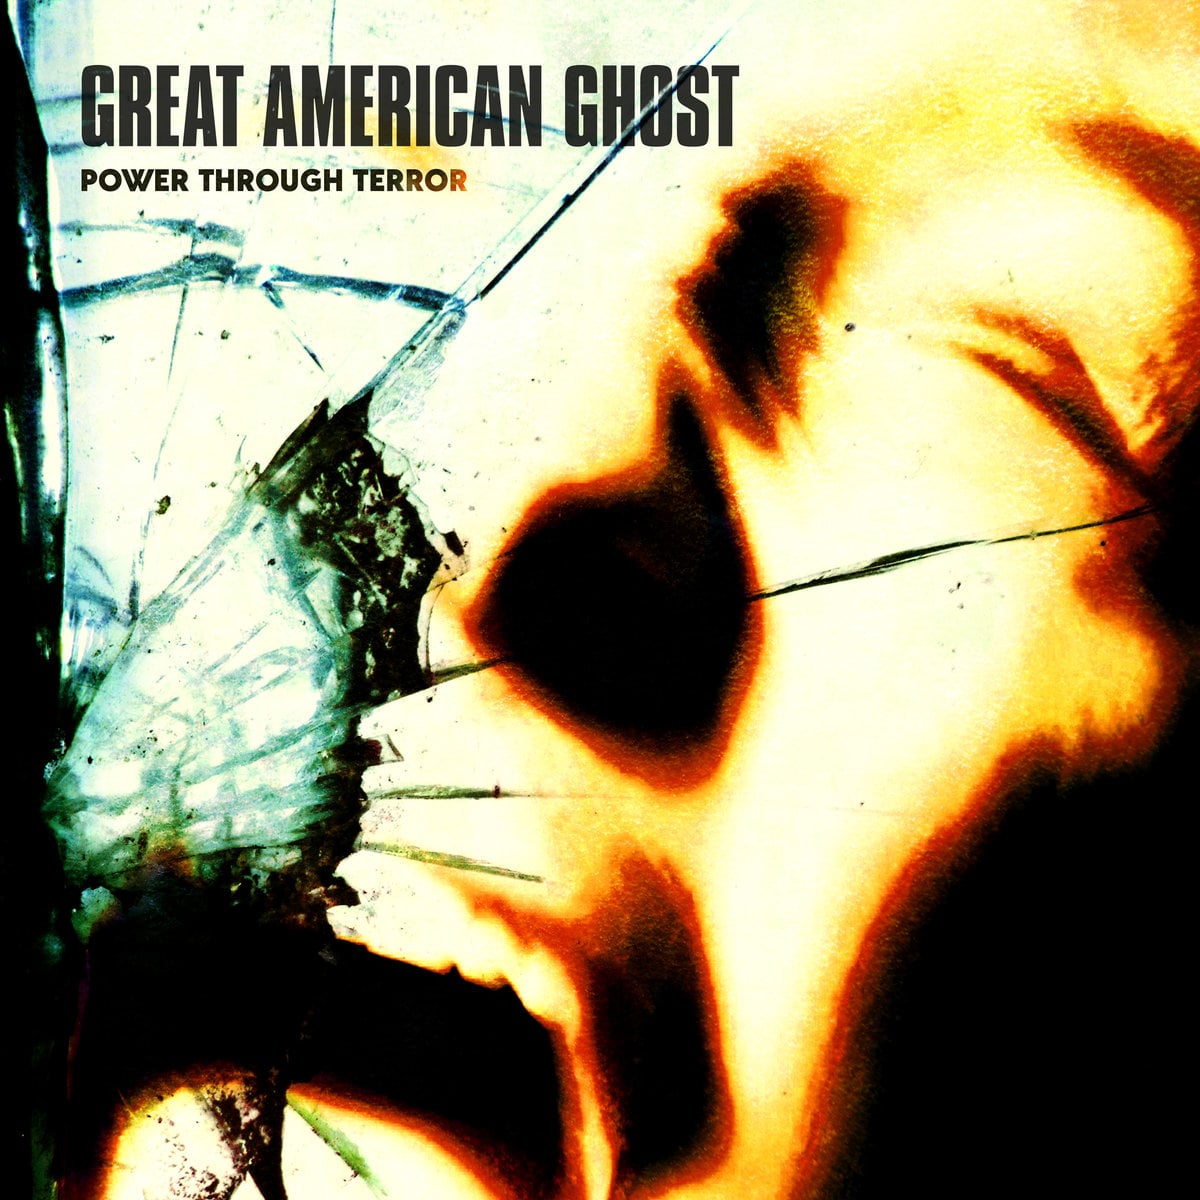 Power Through Terror by GREAT AMERICAN GHOST!